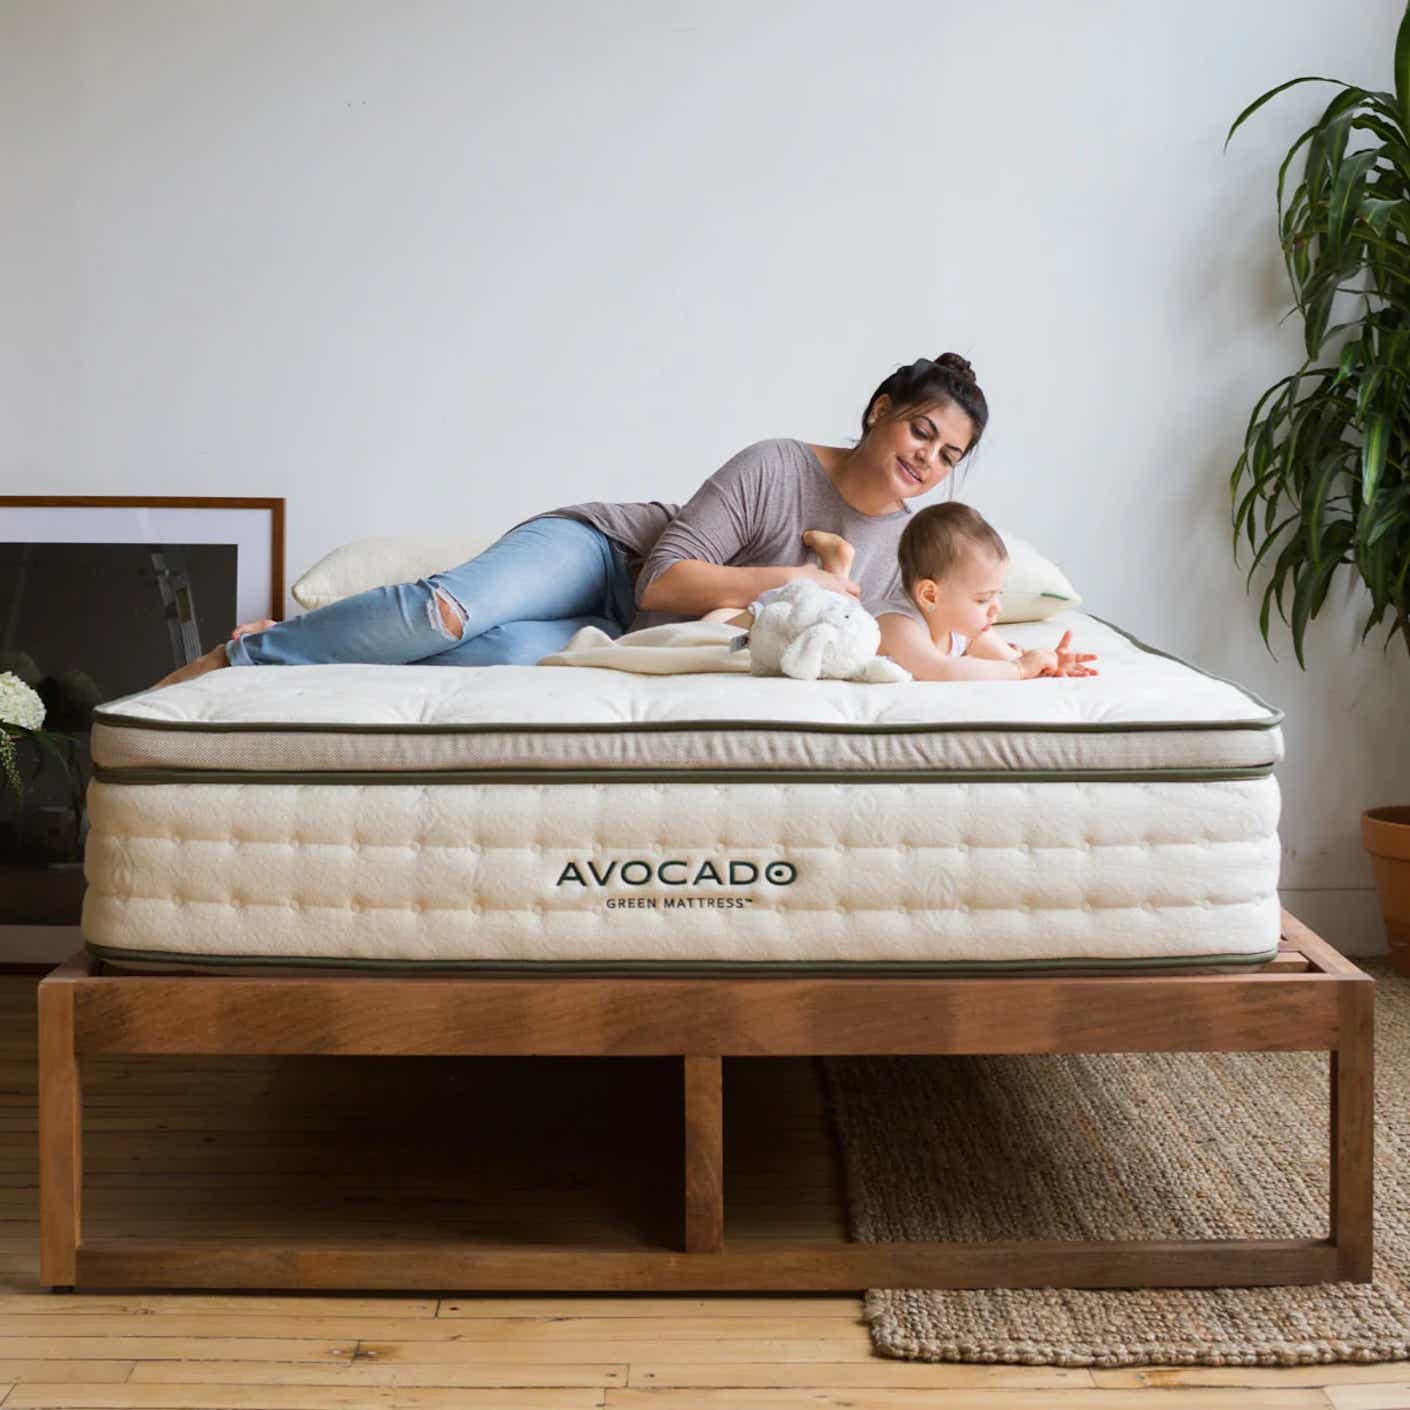 A woman and baby lie on a mattress.